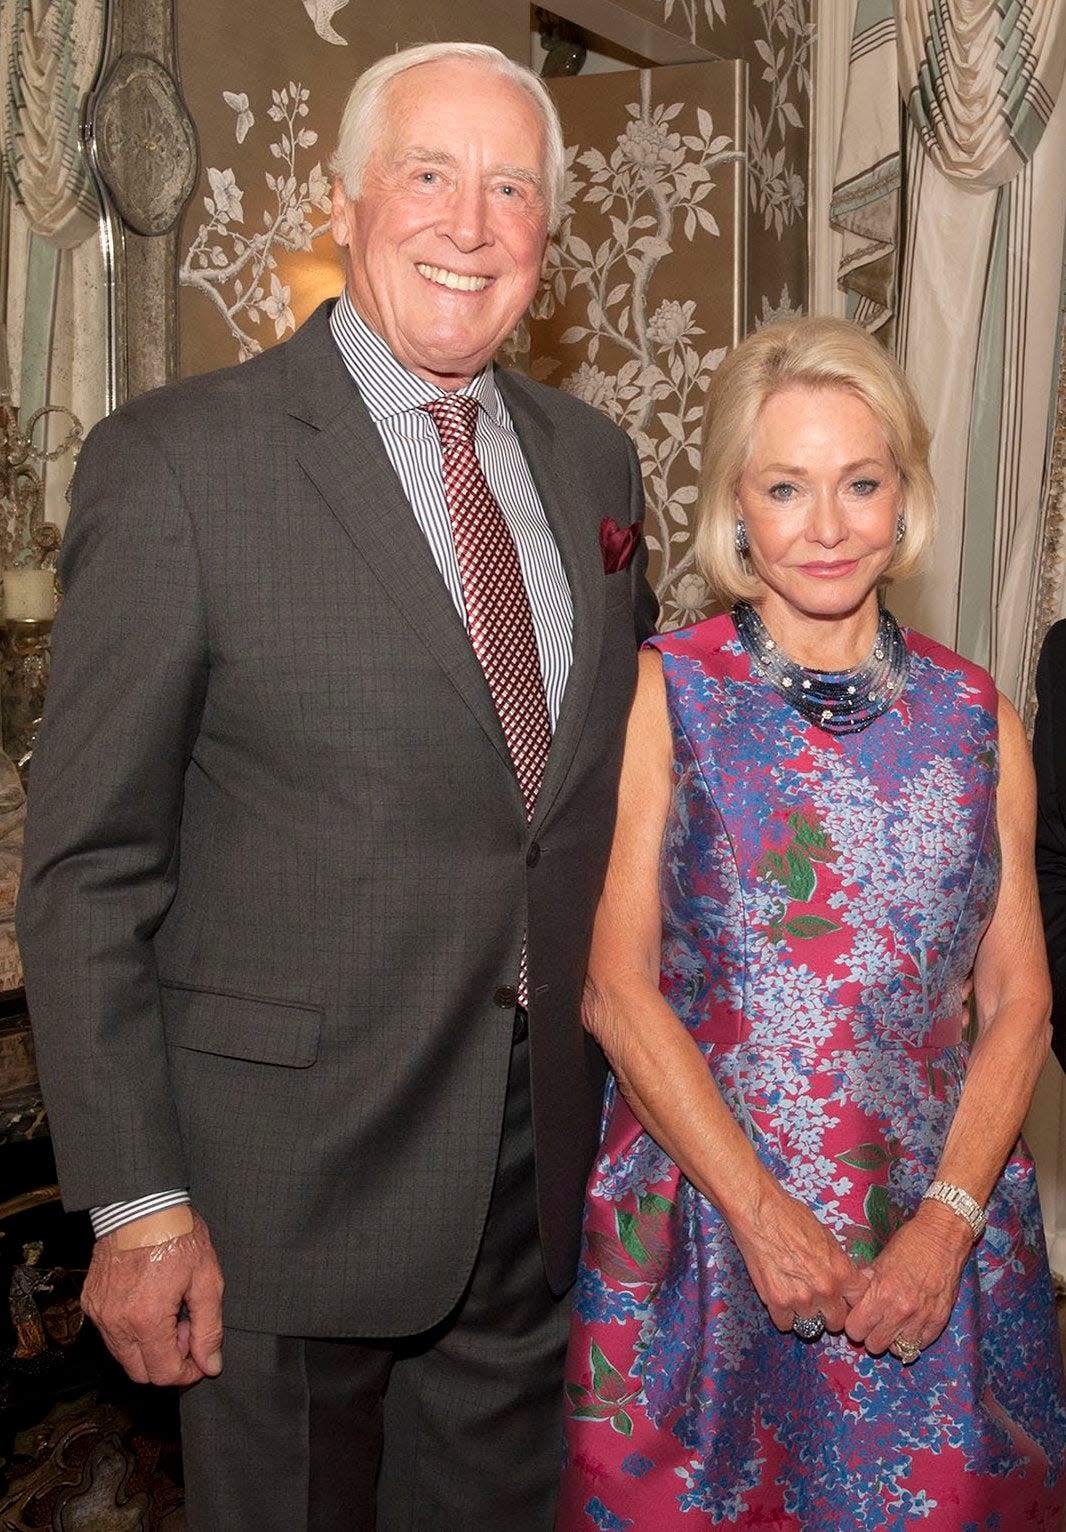 Ambassador Mary Ourisman Dawkins will be invested as a Dame in the Royal Order of Francis I, a dynastic honor institution. She is shown with her husband, retired Brig. Gen. Peter Dawkins.